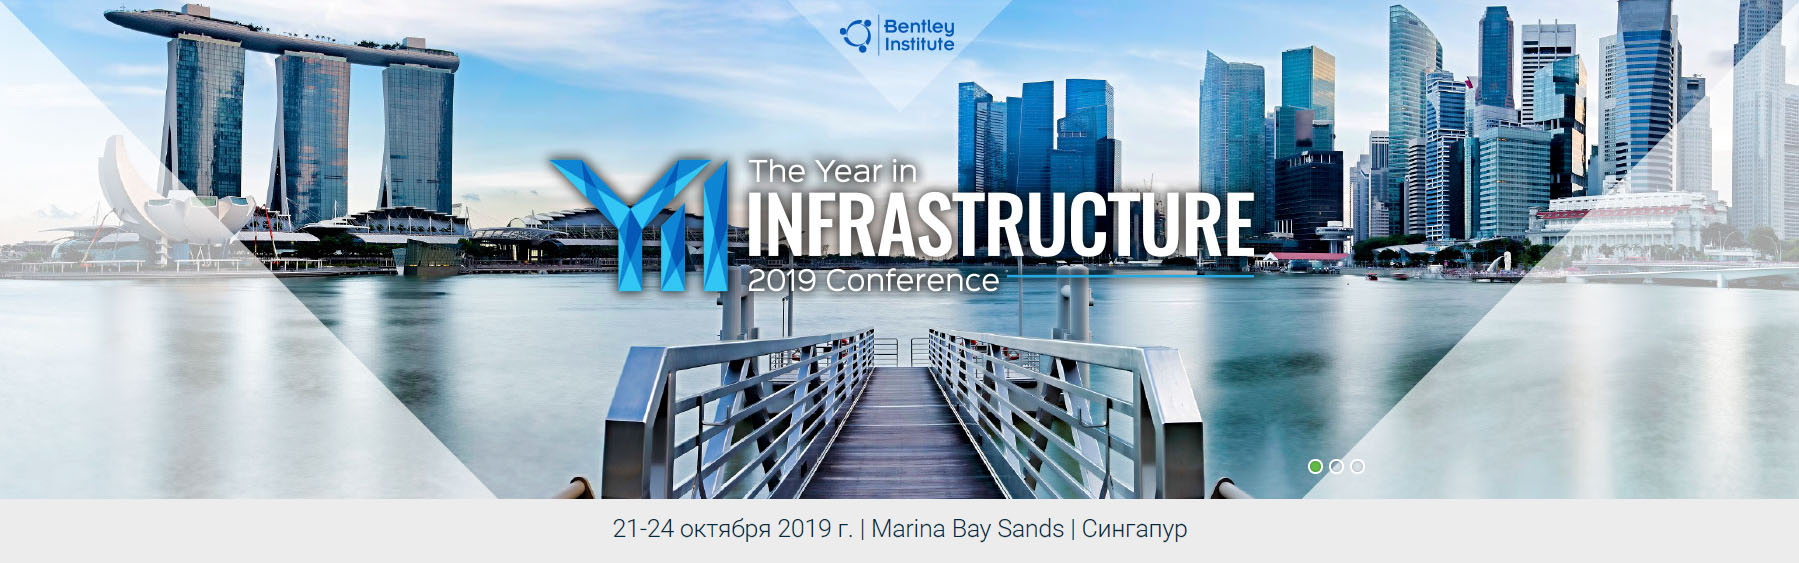 Year In Infrastructure 2019